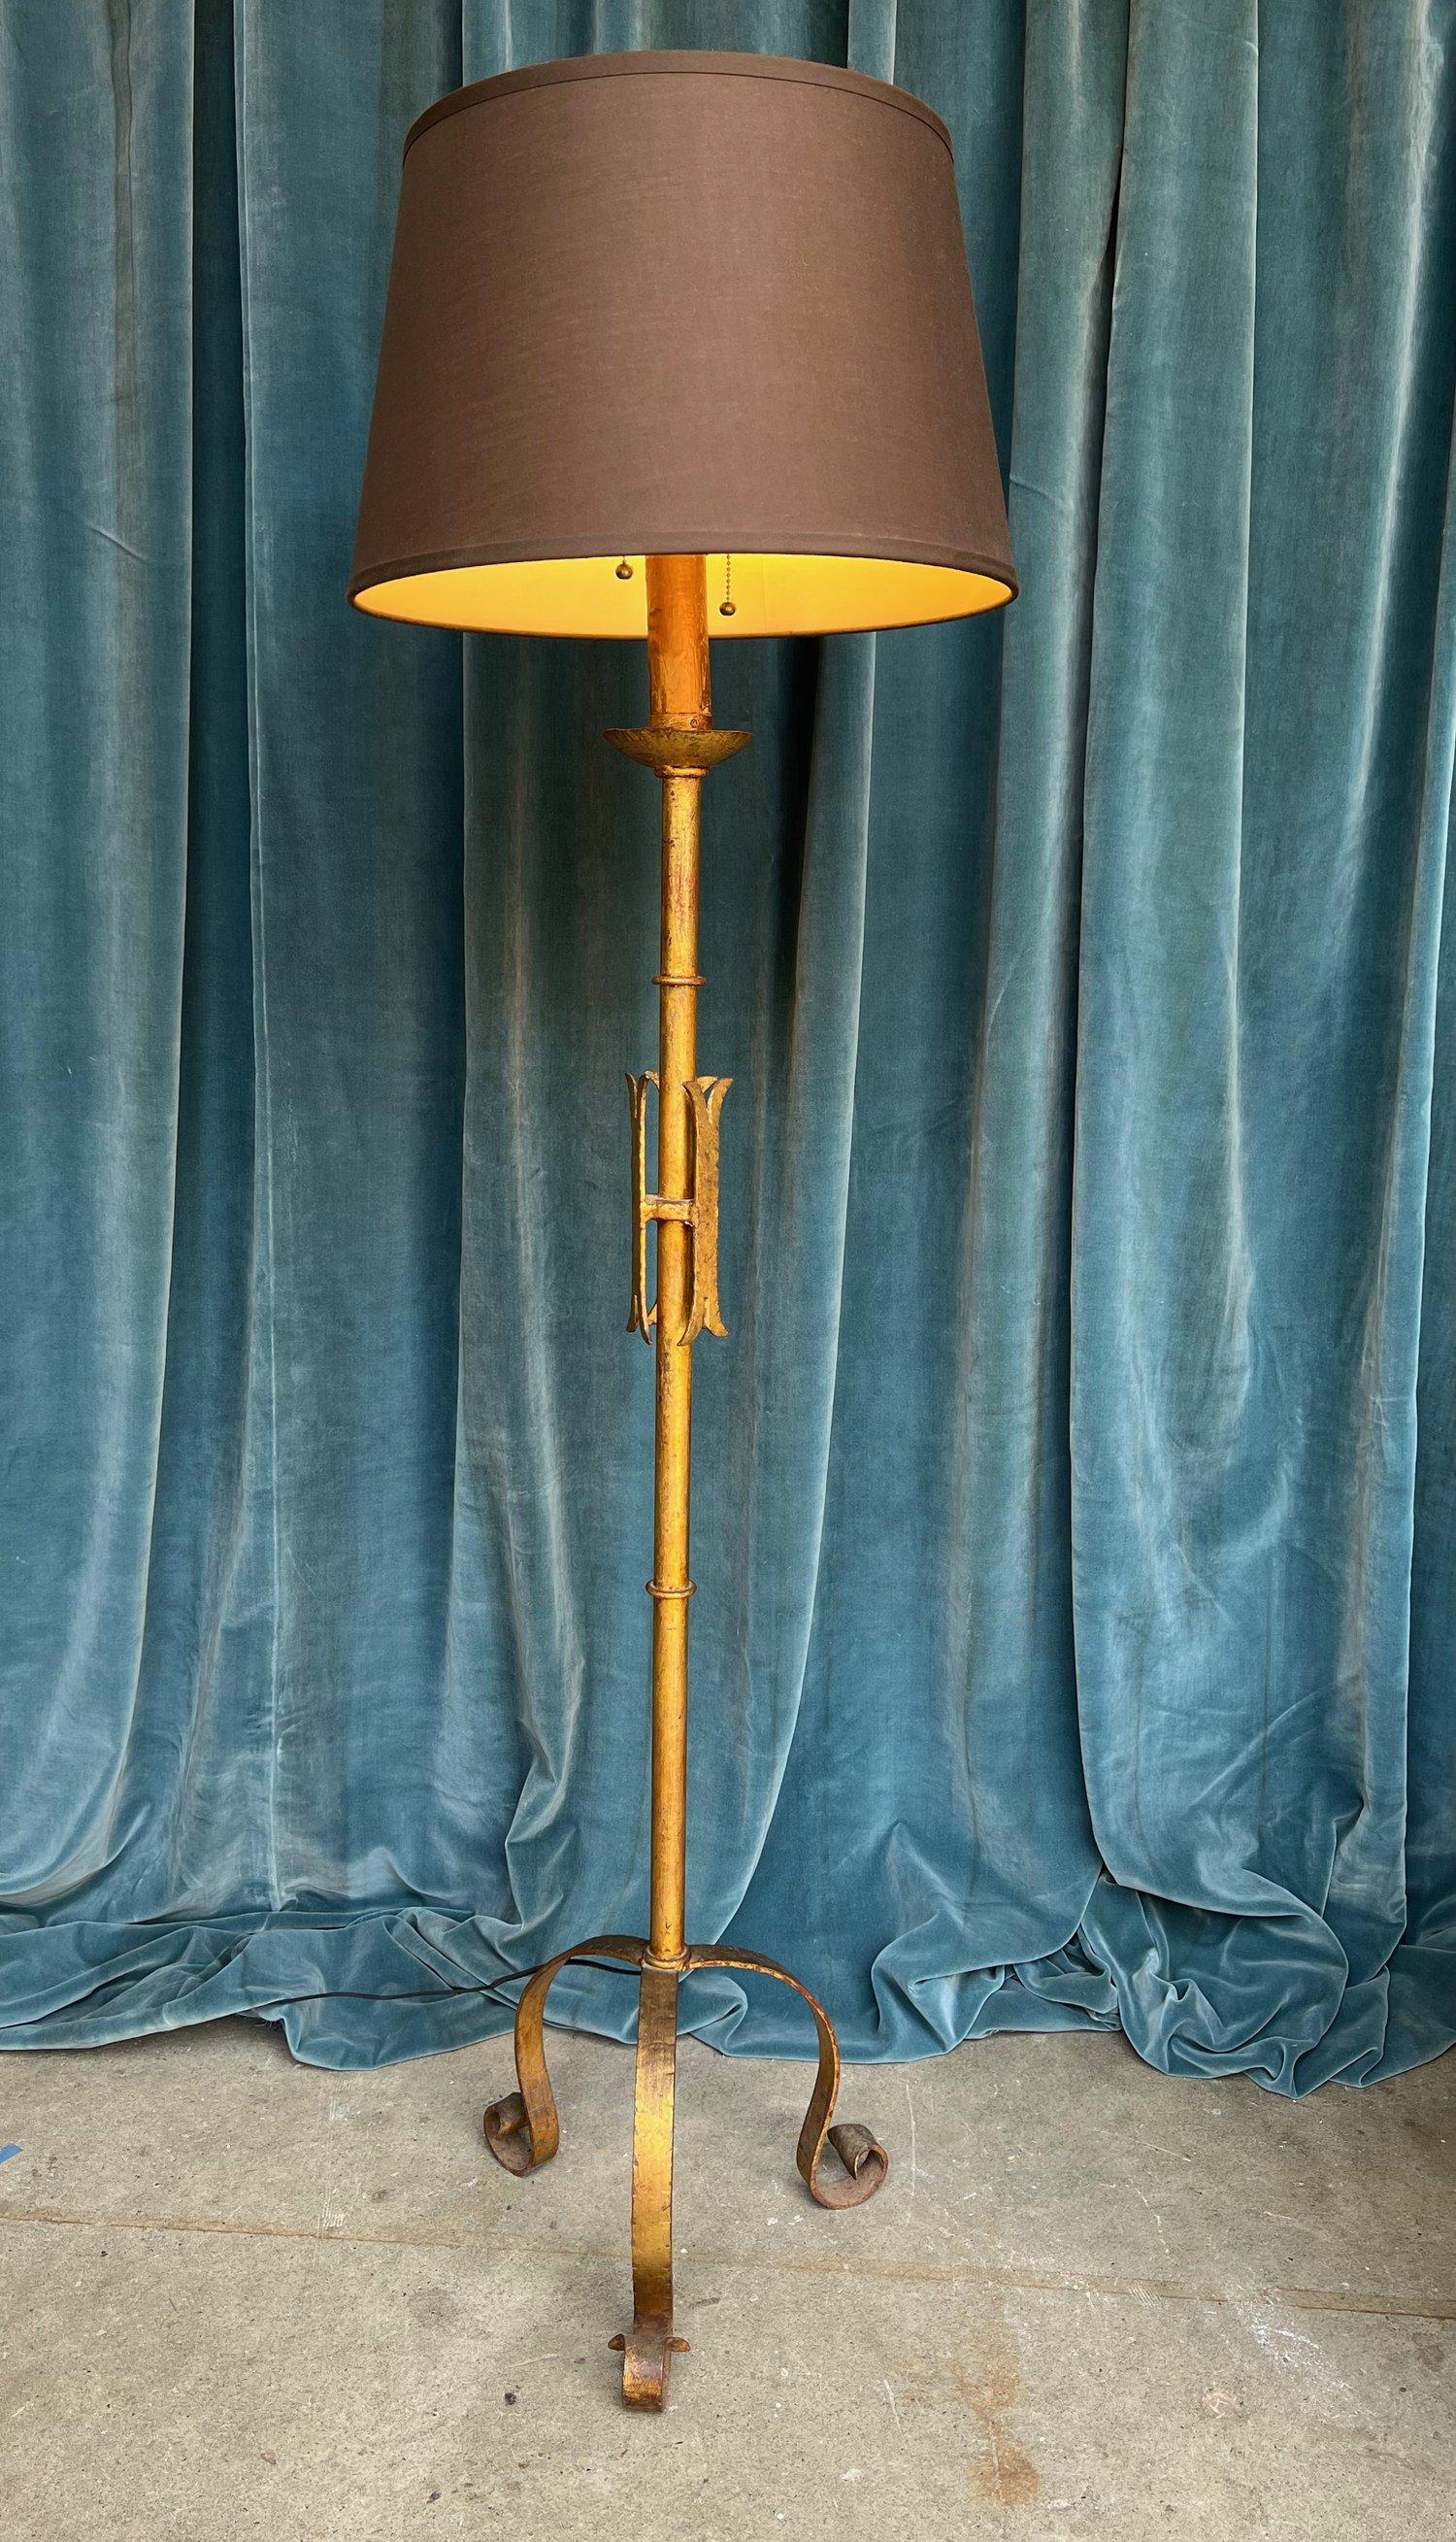 Introducing a unique Spanish 1950s gilt iron floor lamp that adds a touch of elegance to any space. This iron floor lamp features a stunning gilt gold patina, creating a captivating visual appeal. The lamp's central stylized medieval motif showcases